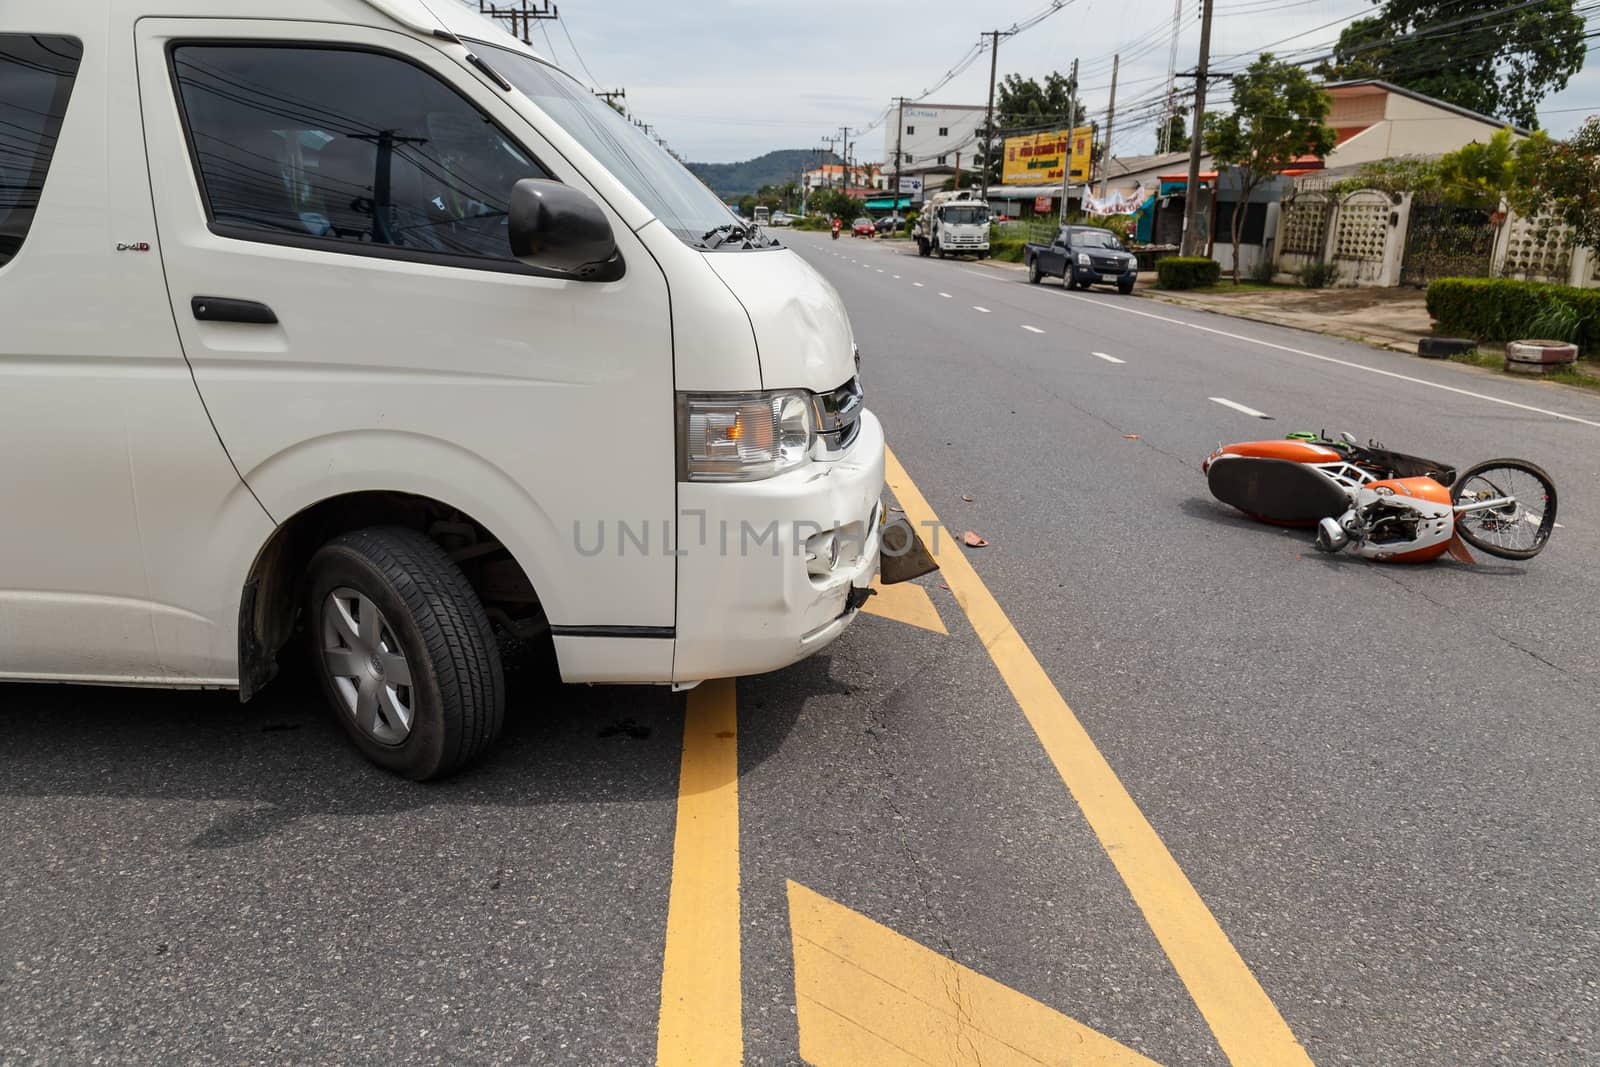 PHUKET, THAILAND - NOVEMBER 3 : Van accident on the road and cra by nanDphanuwat